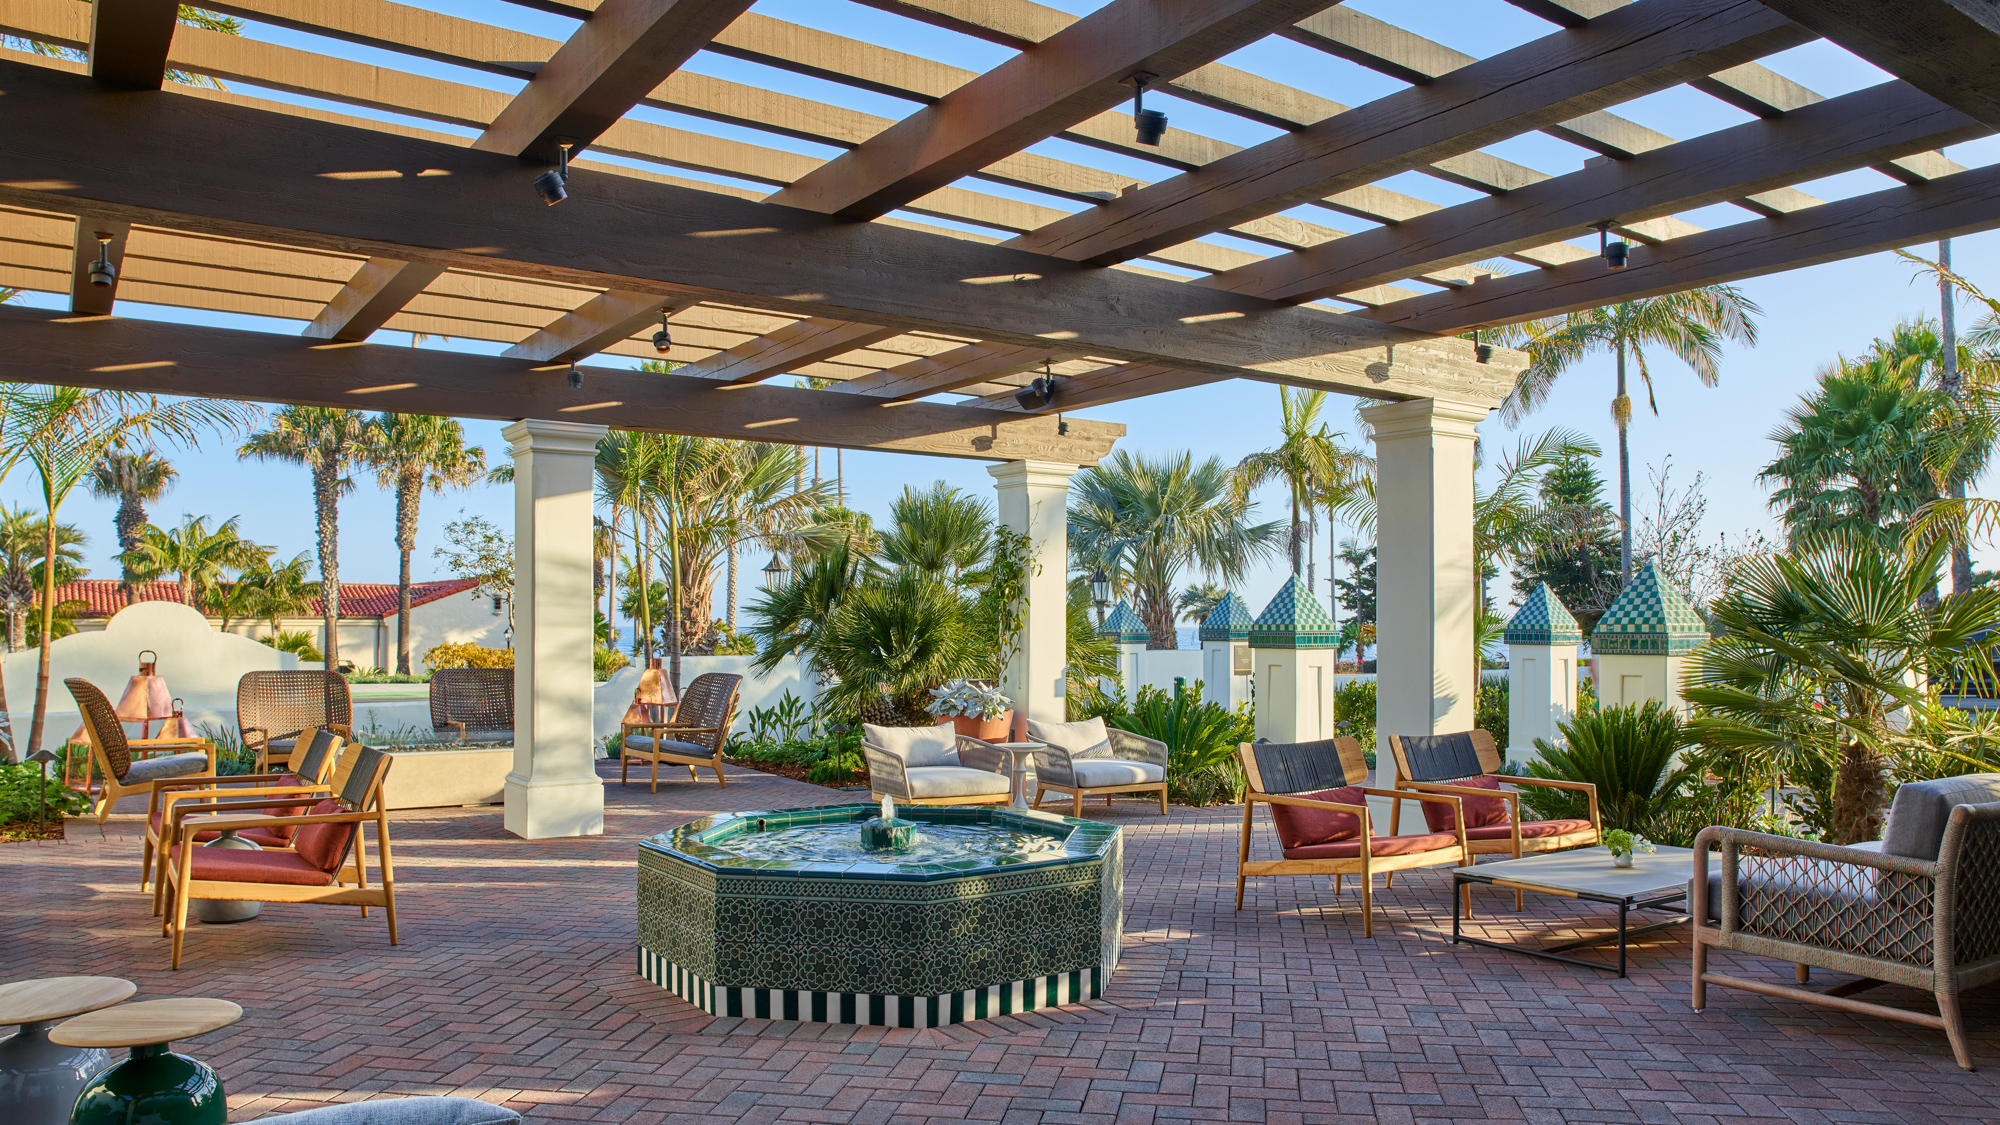 Outdoor patio area with grey lounge chairs and terrace roof above outdoor firepit near palm trees at Mar Monte Hotel in Santa Barbara, CA